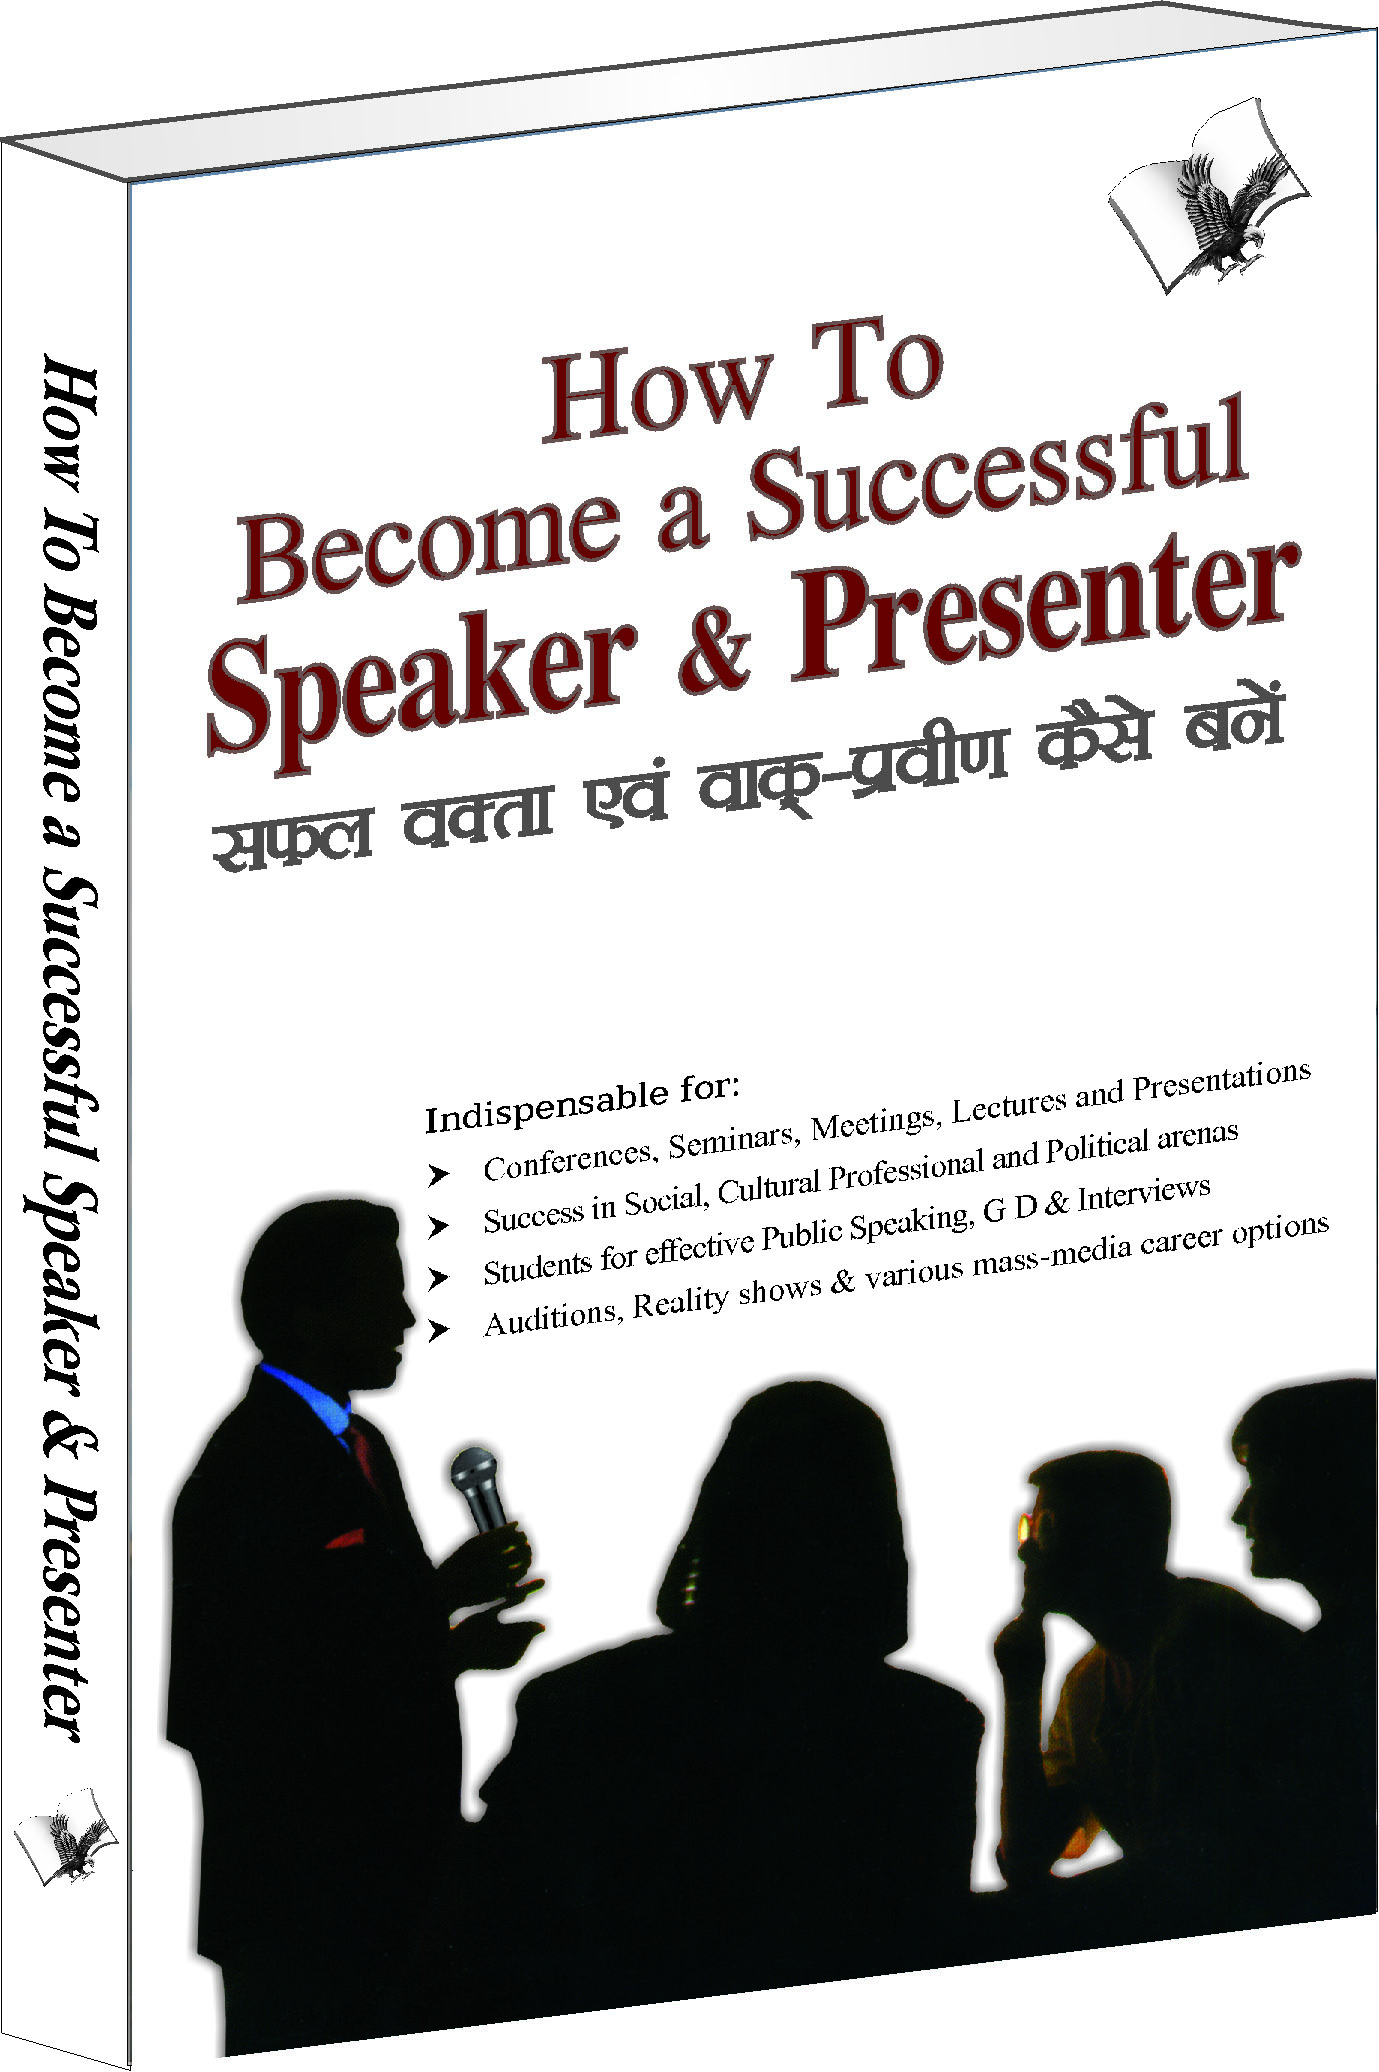 How To Become A Successful Speaker & Presenter-Effective speaking - What works & what not before audience